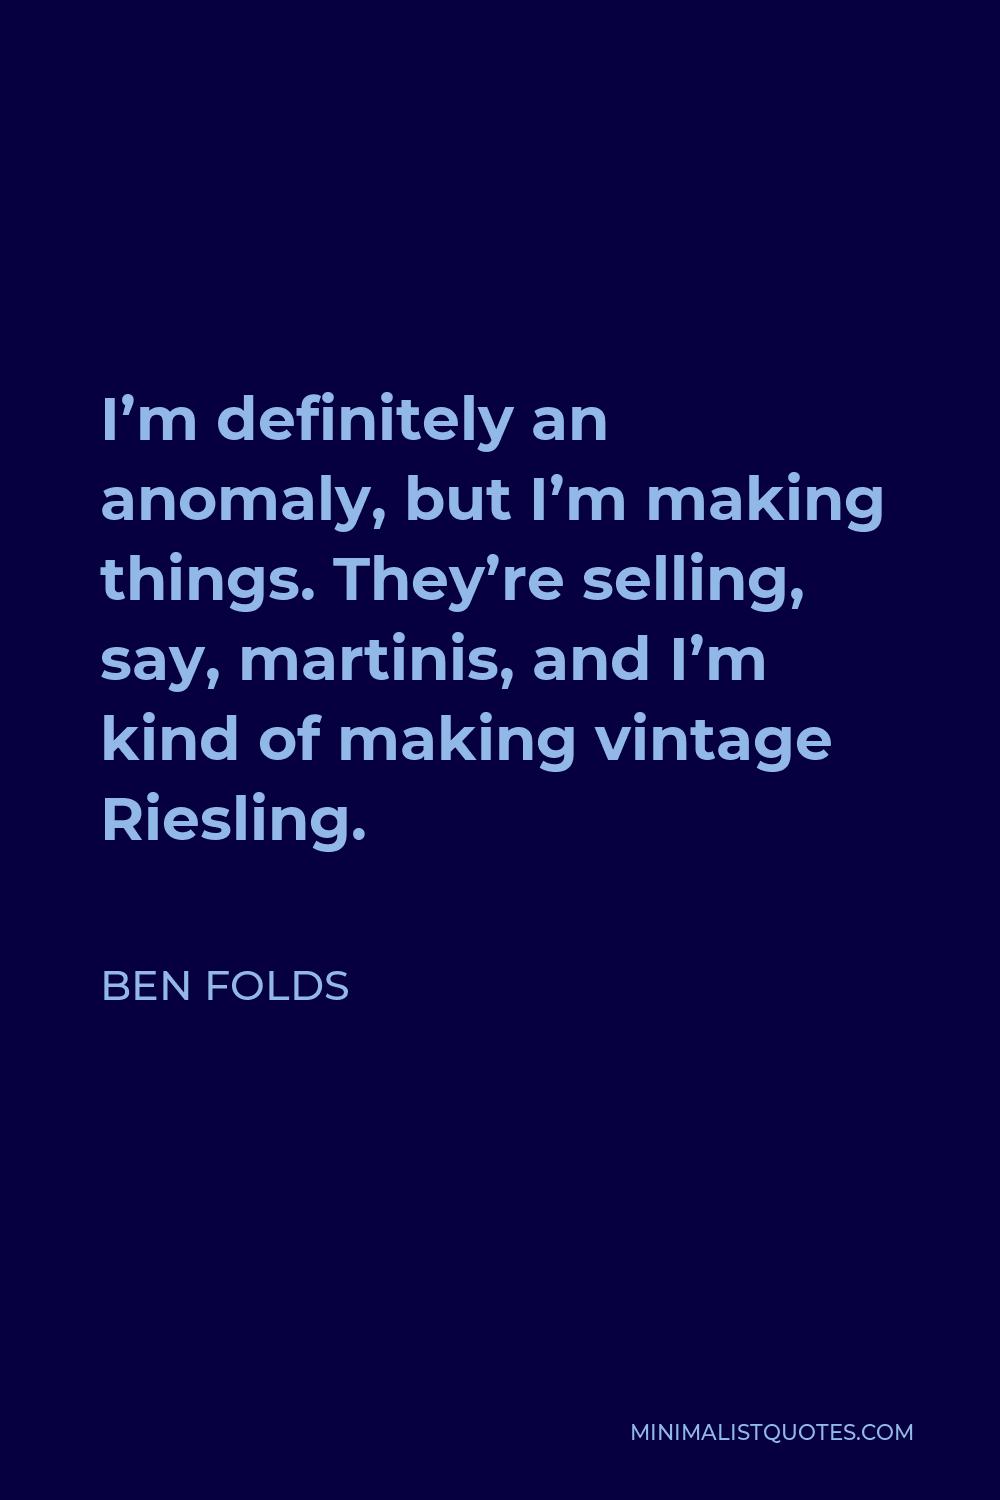 Ben Folds Quote - I’m definitely an anomaly, but I’m making things. They’re selling, say, martinis, and I’m kind of making vintage Riesling.